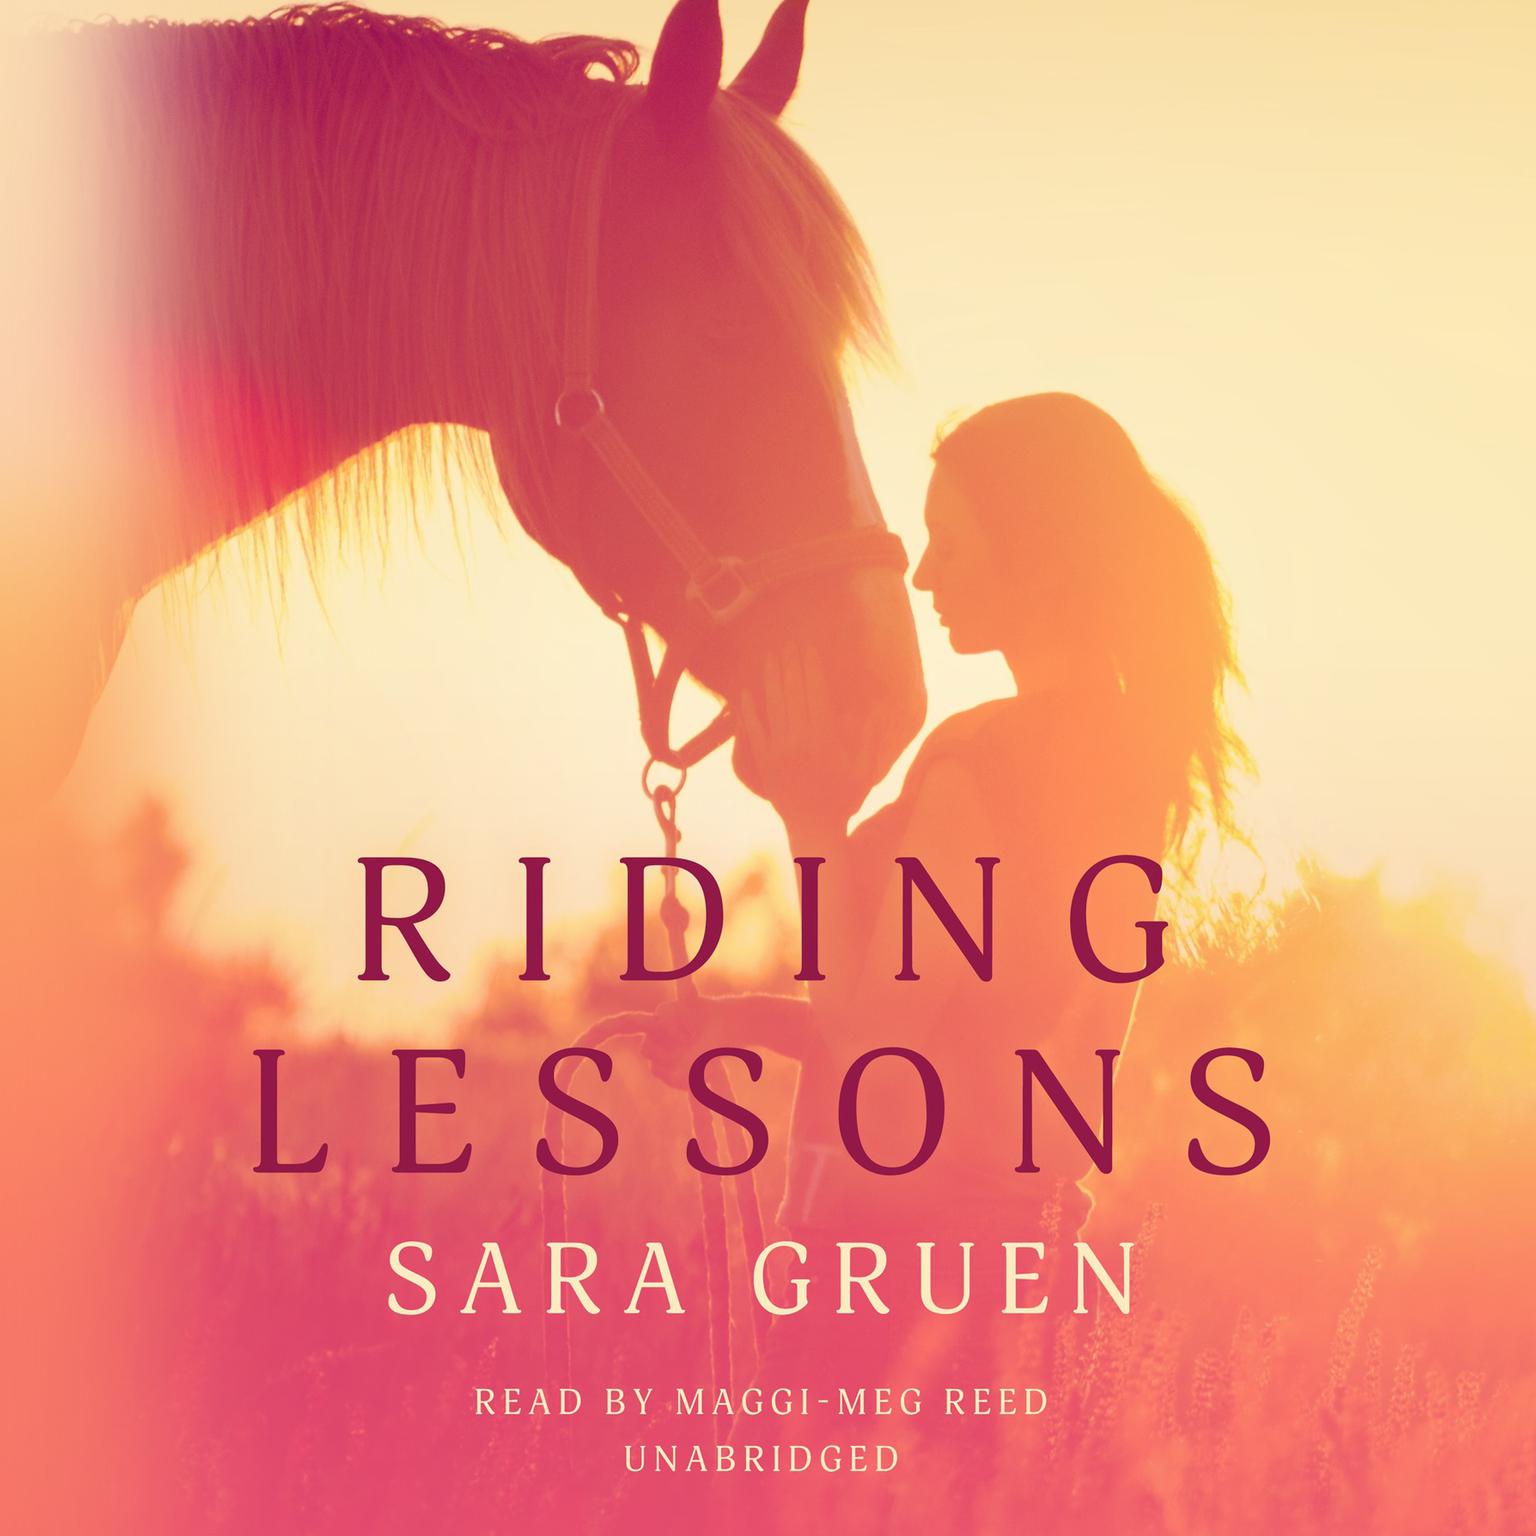 Riding Lessons Audiobook by Sara Gruen — Listen Now